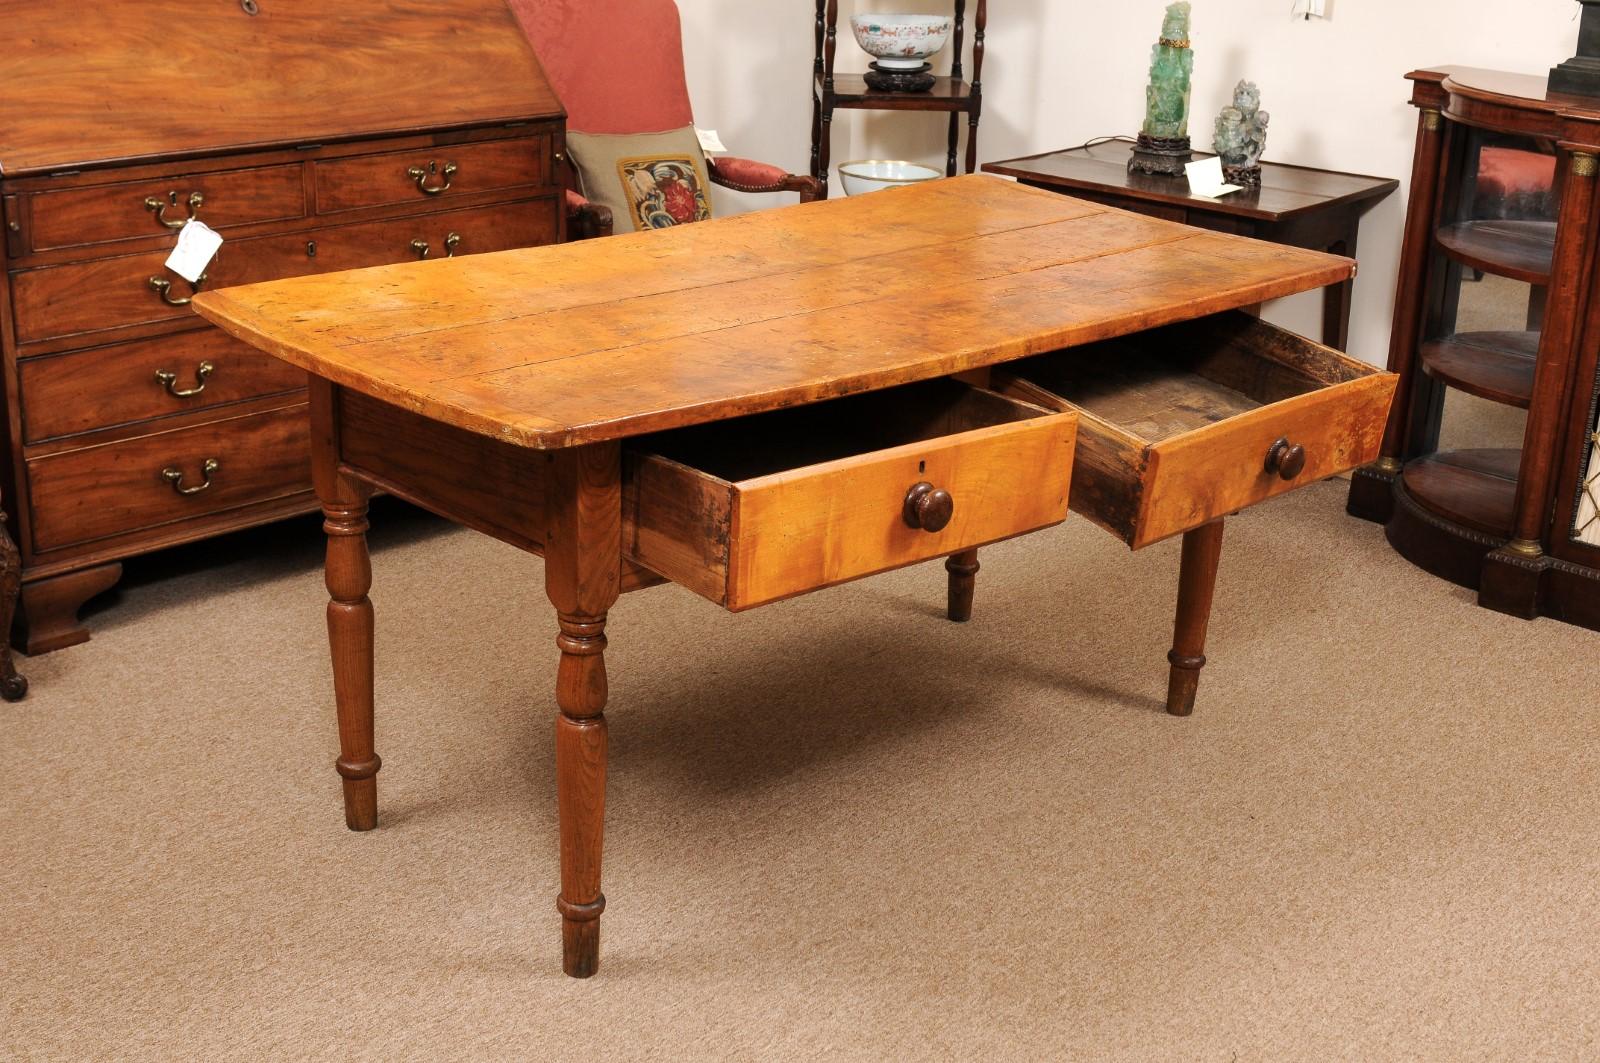 19th Century Large American Pine Kitchen Table with 2 Deep Drawers and Turned Legs, c1890 For Sale